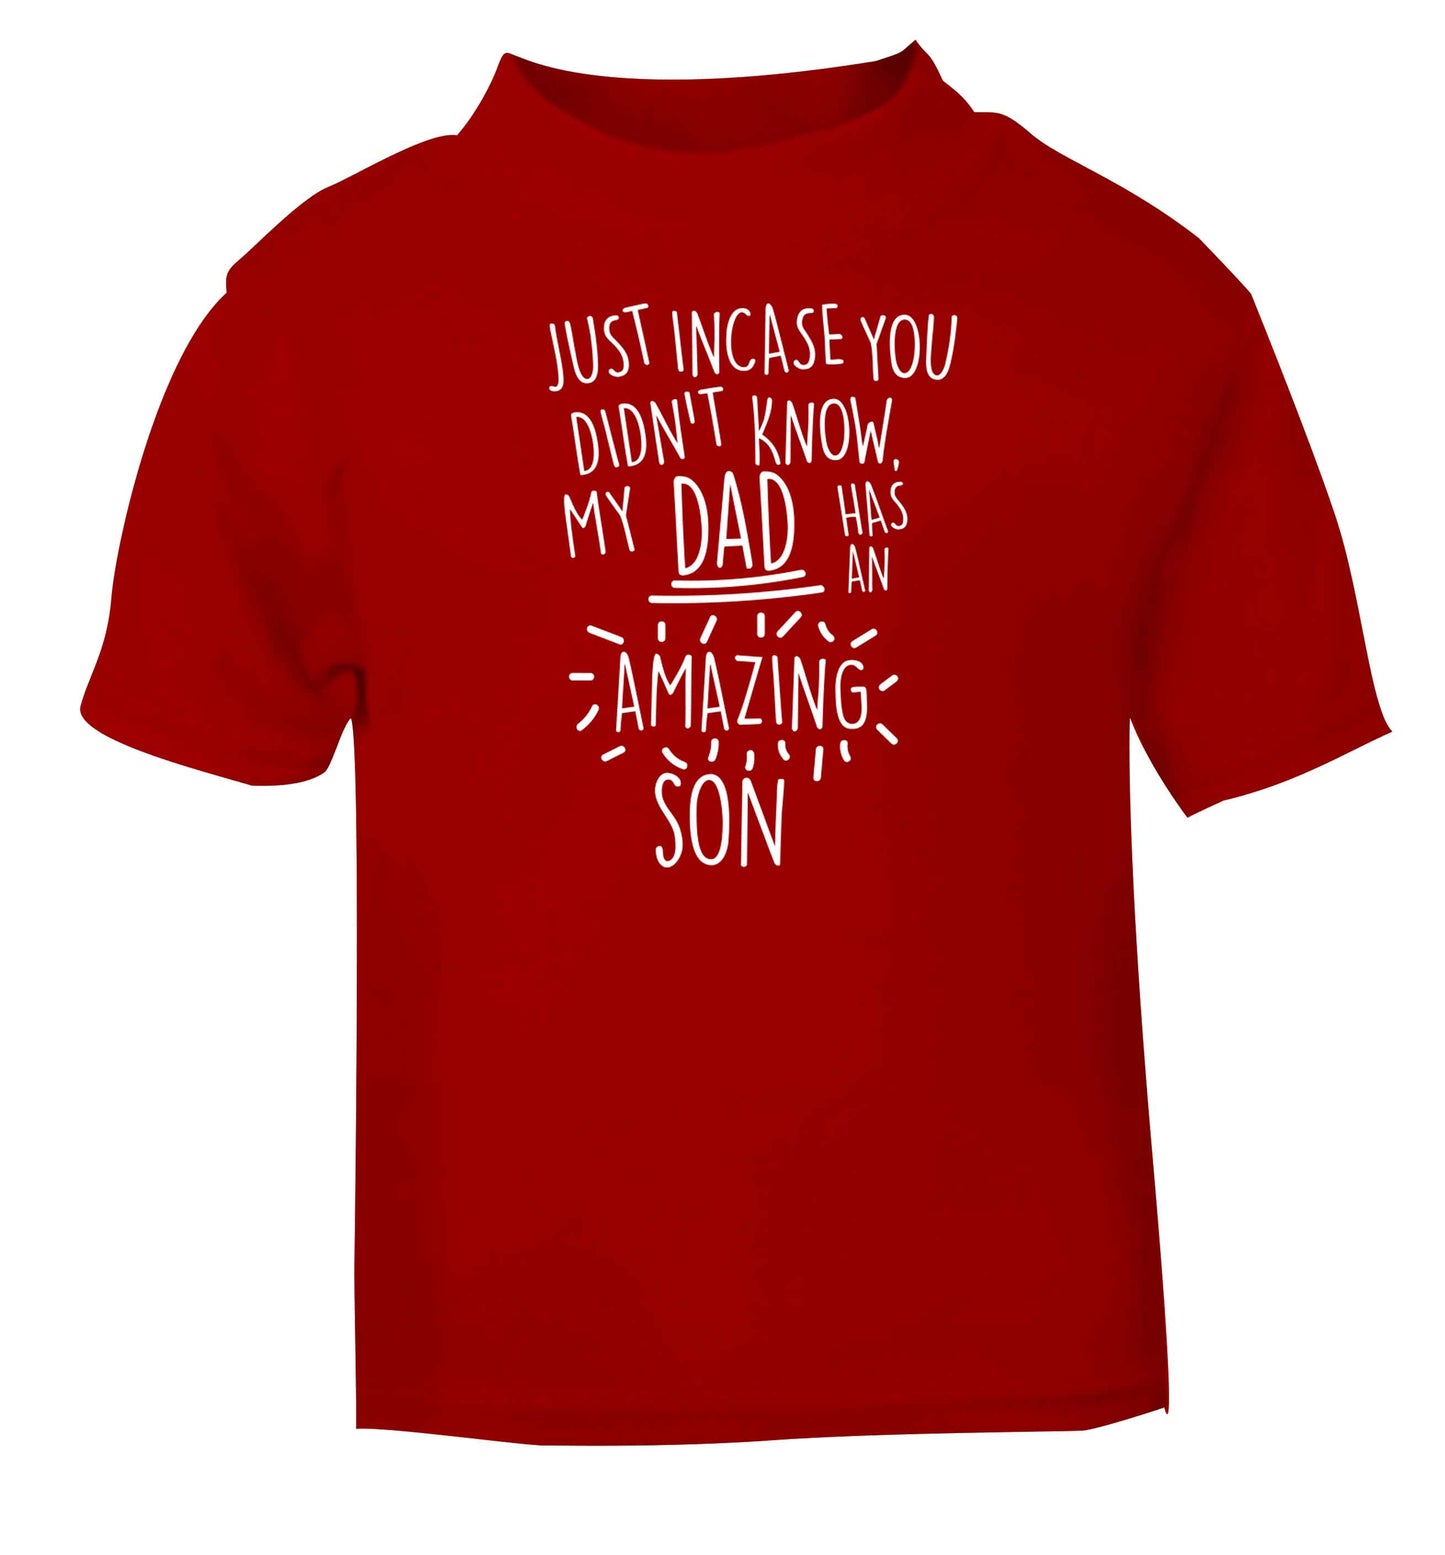 Just incase you didn't know my dad has an amazing son red baby toddler Tshirt 2 Years